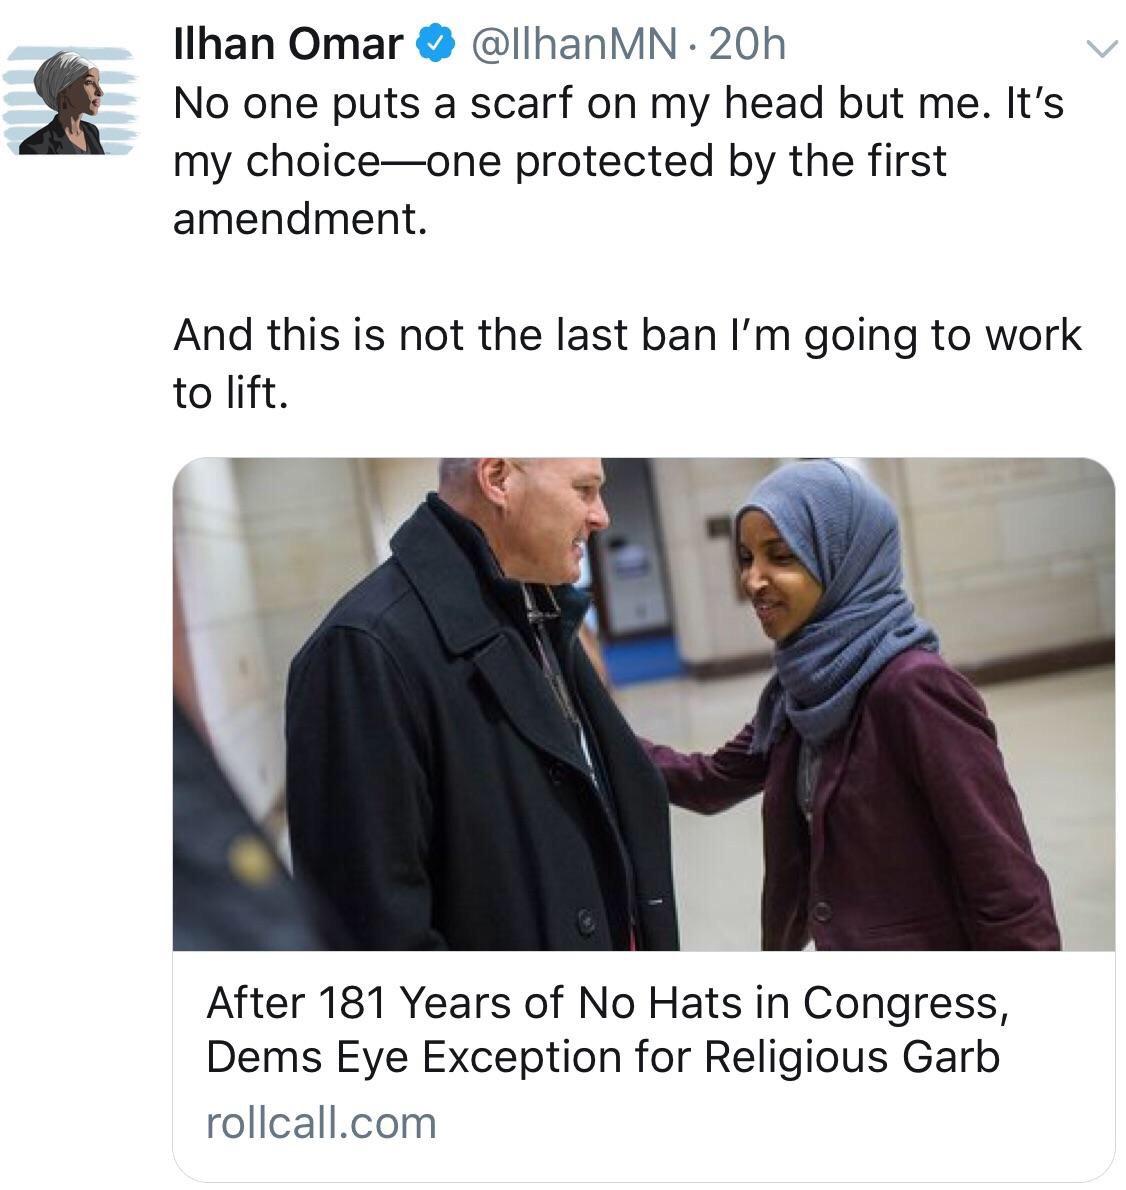 Congresswoman+Ilhan+Omar+lifts+ban+on+religious+headscarves+after+181+years.